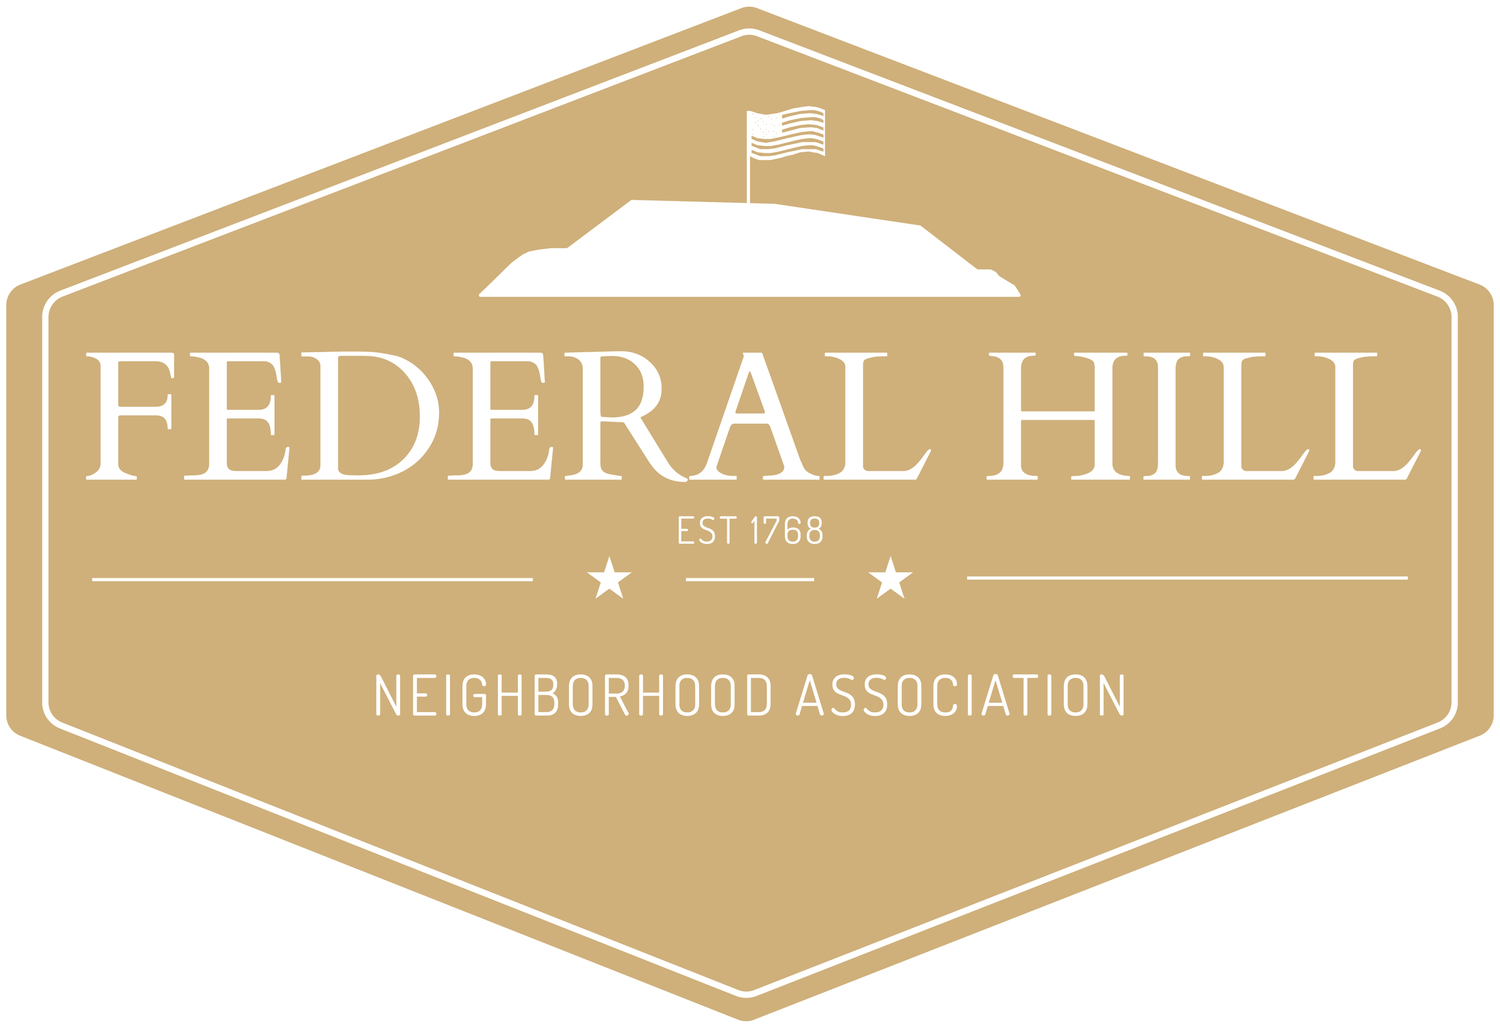 Federal Hill Neighborhood Association in Baltimore MD